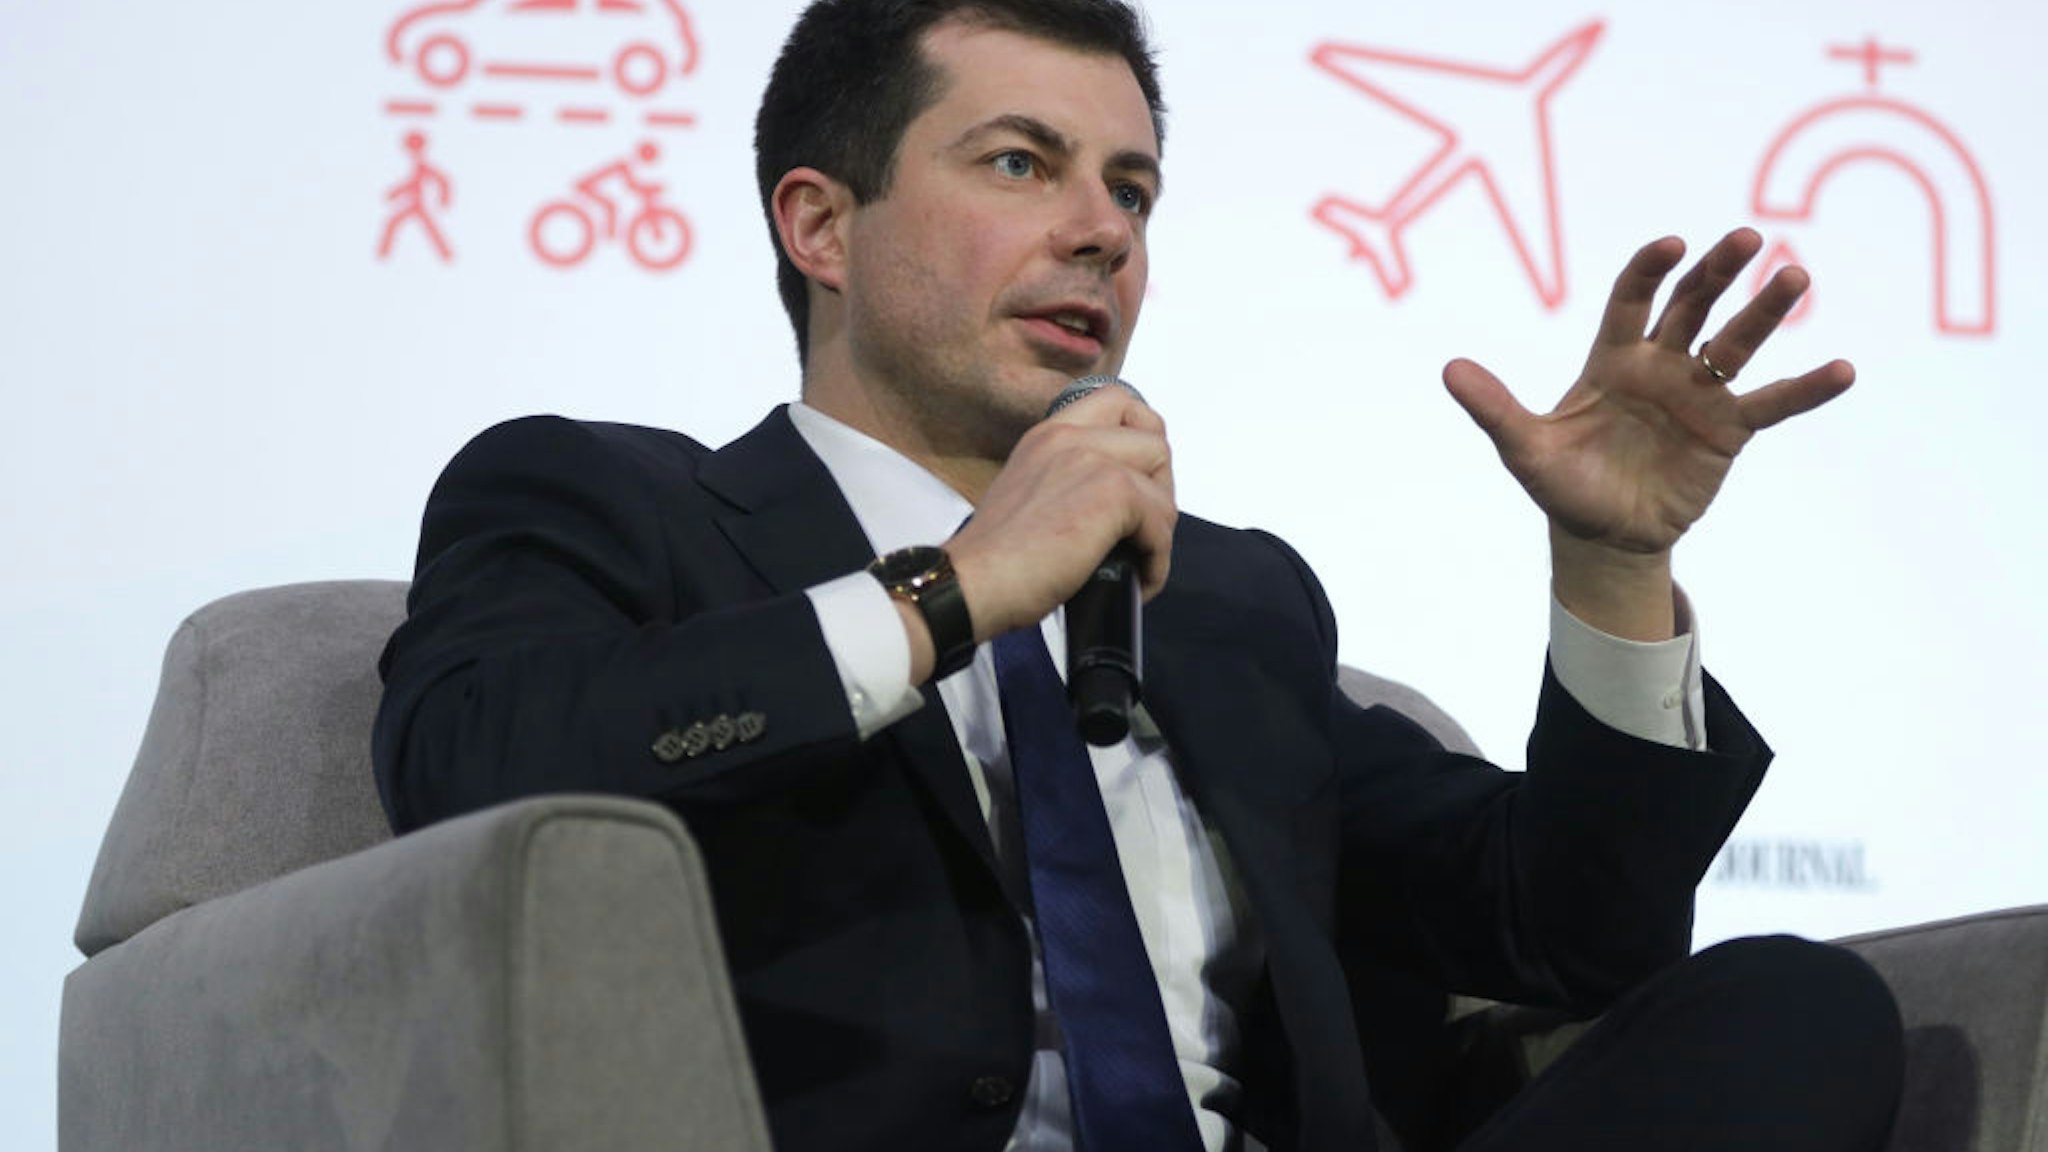 Democratic presidential candidate former South Bend, Indiana Mayor Pete Buttigieg participates in a “Moving America Forward: A Presidential Candidate Forum on Infrastructure, Jobs, and Building a Better America” at University of Nevada February 16, 2020 in Las Vegas, Nevada.